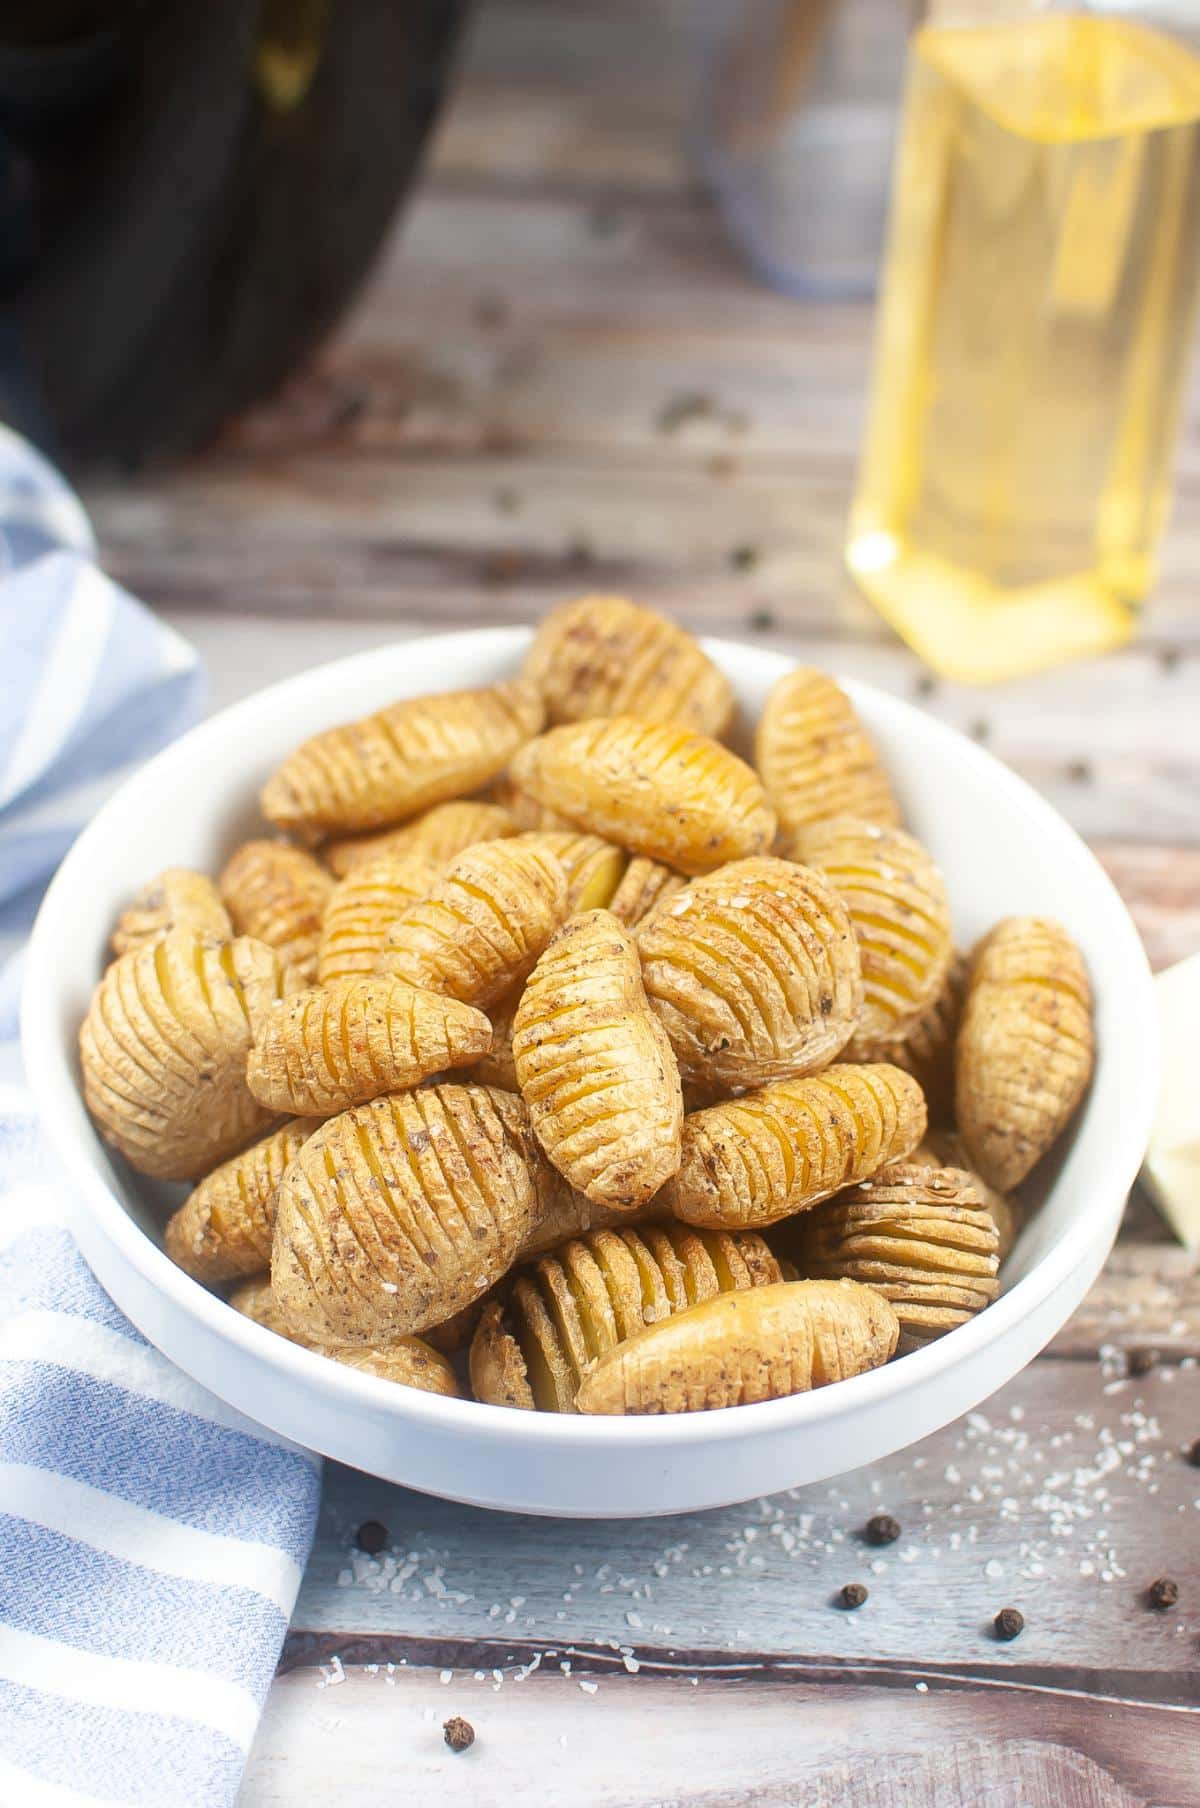 A bowl full of Hasselback potatoes on a table next to a bottle of olive oil.